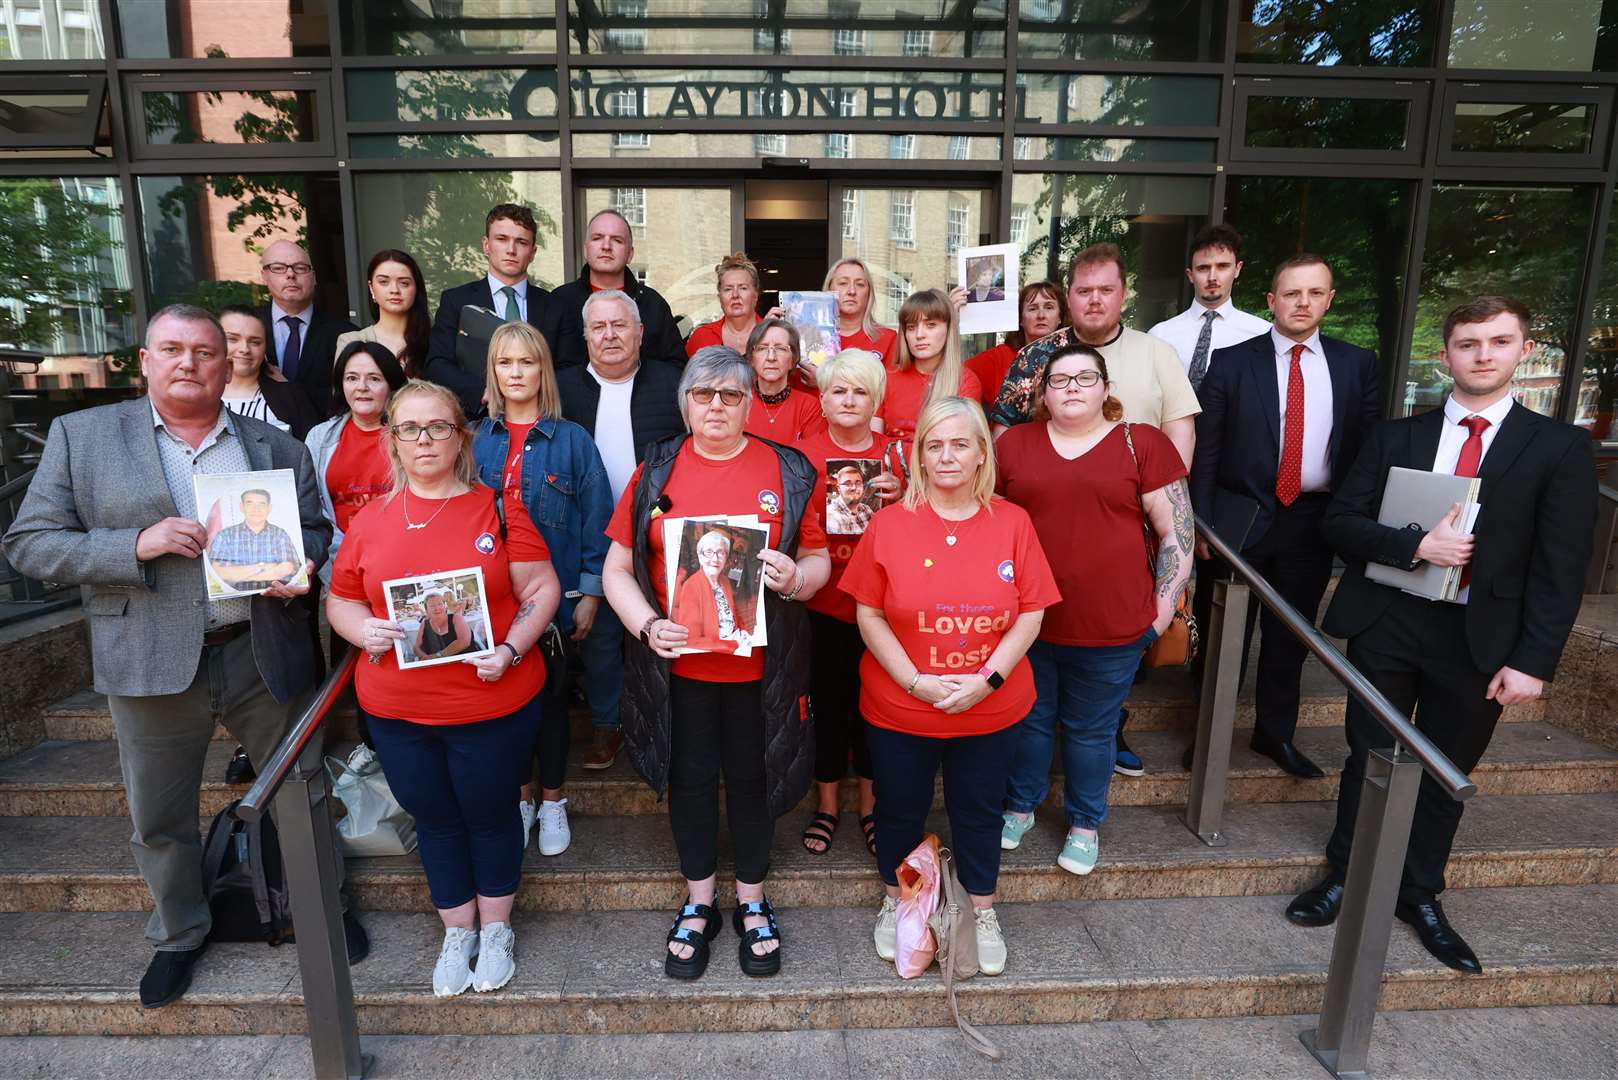 Members of Northern Ireland Covid-19 Bereaved Families for Justice hold a press conference outside the Clayton Hotel in Belfast (Liam McBurney/PA)